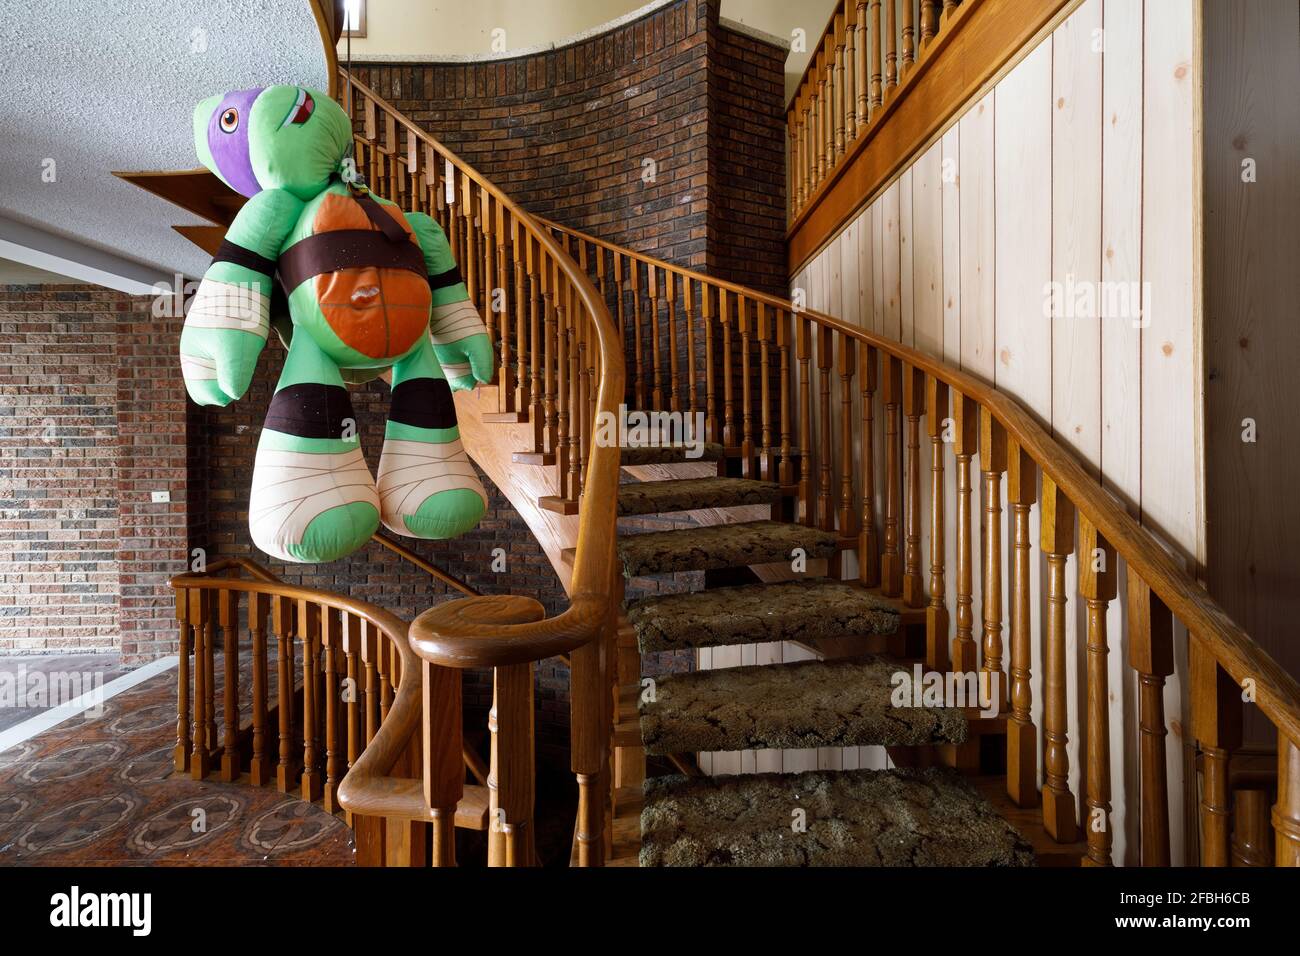 A Donatello Teenage Mutant Ninja Turtle stuffed toy hanging from a  staircase by the neck Stock Photo - Alamy